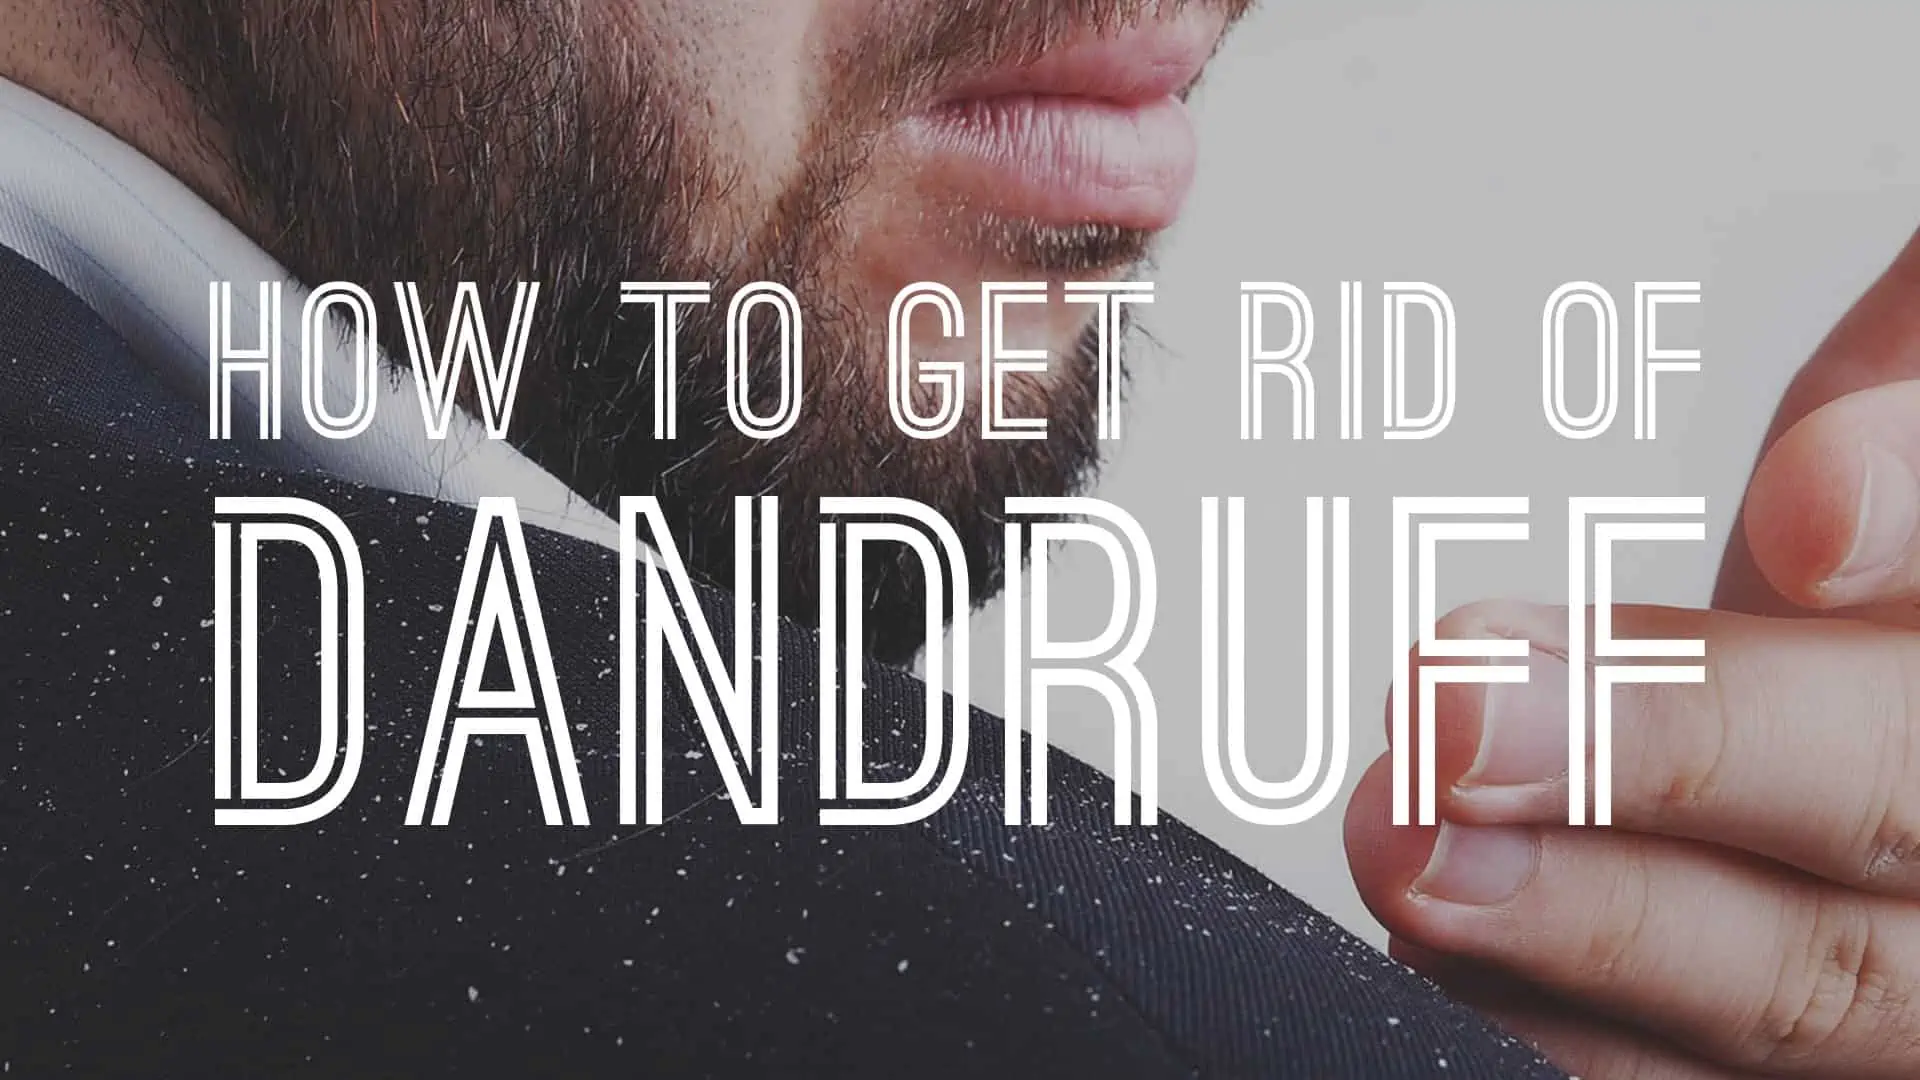 How To Get Rid Of Dandruff and Itchy Scalp